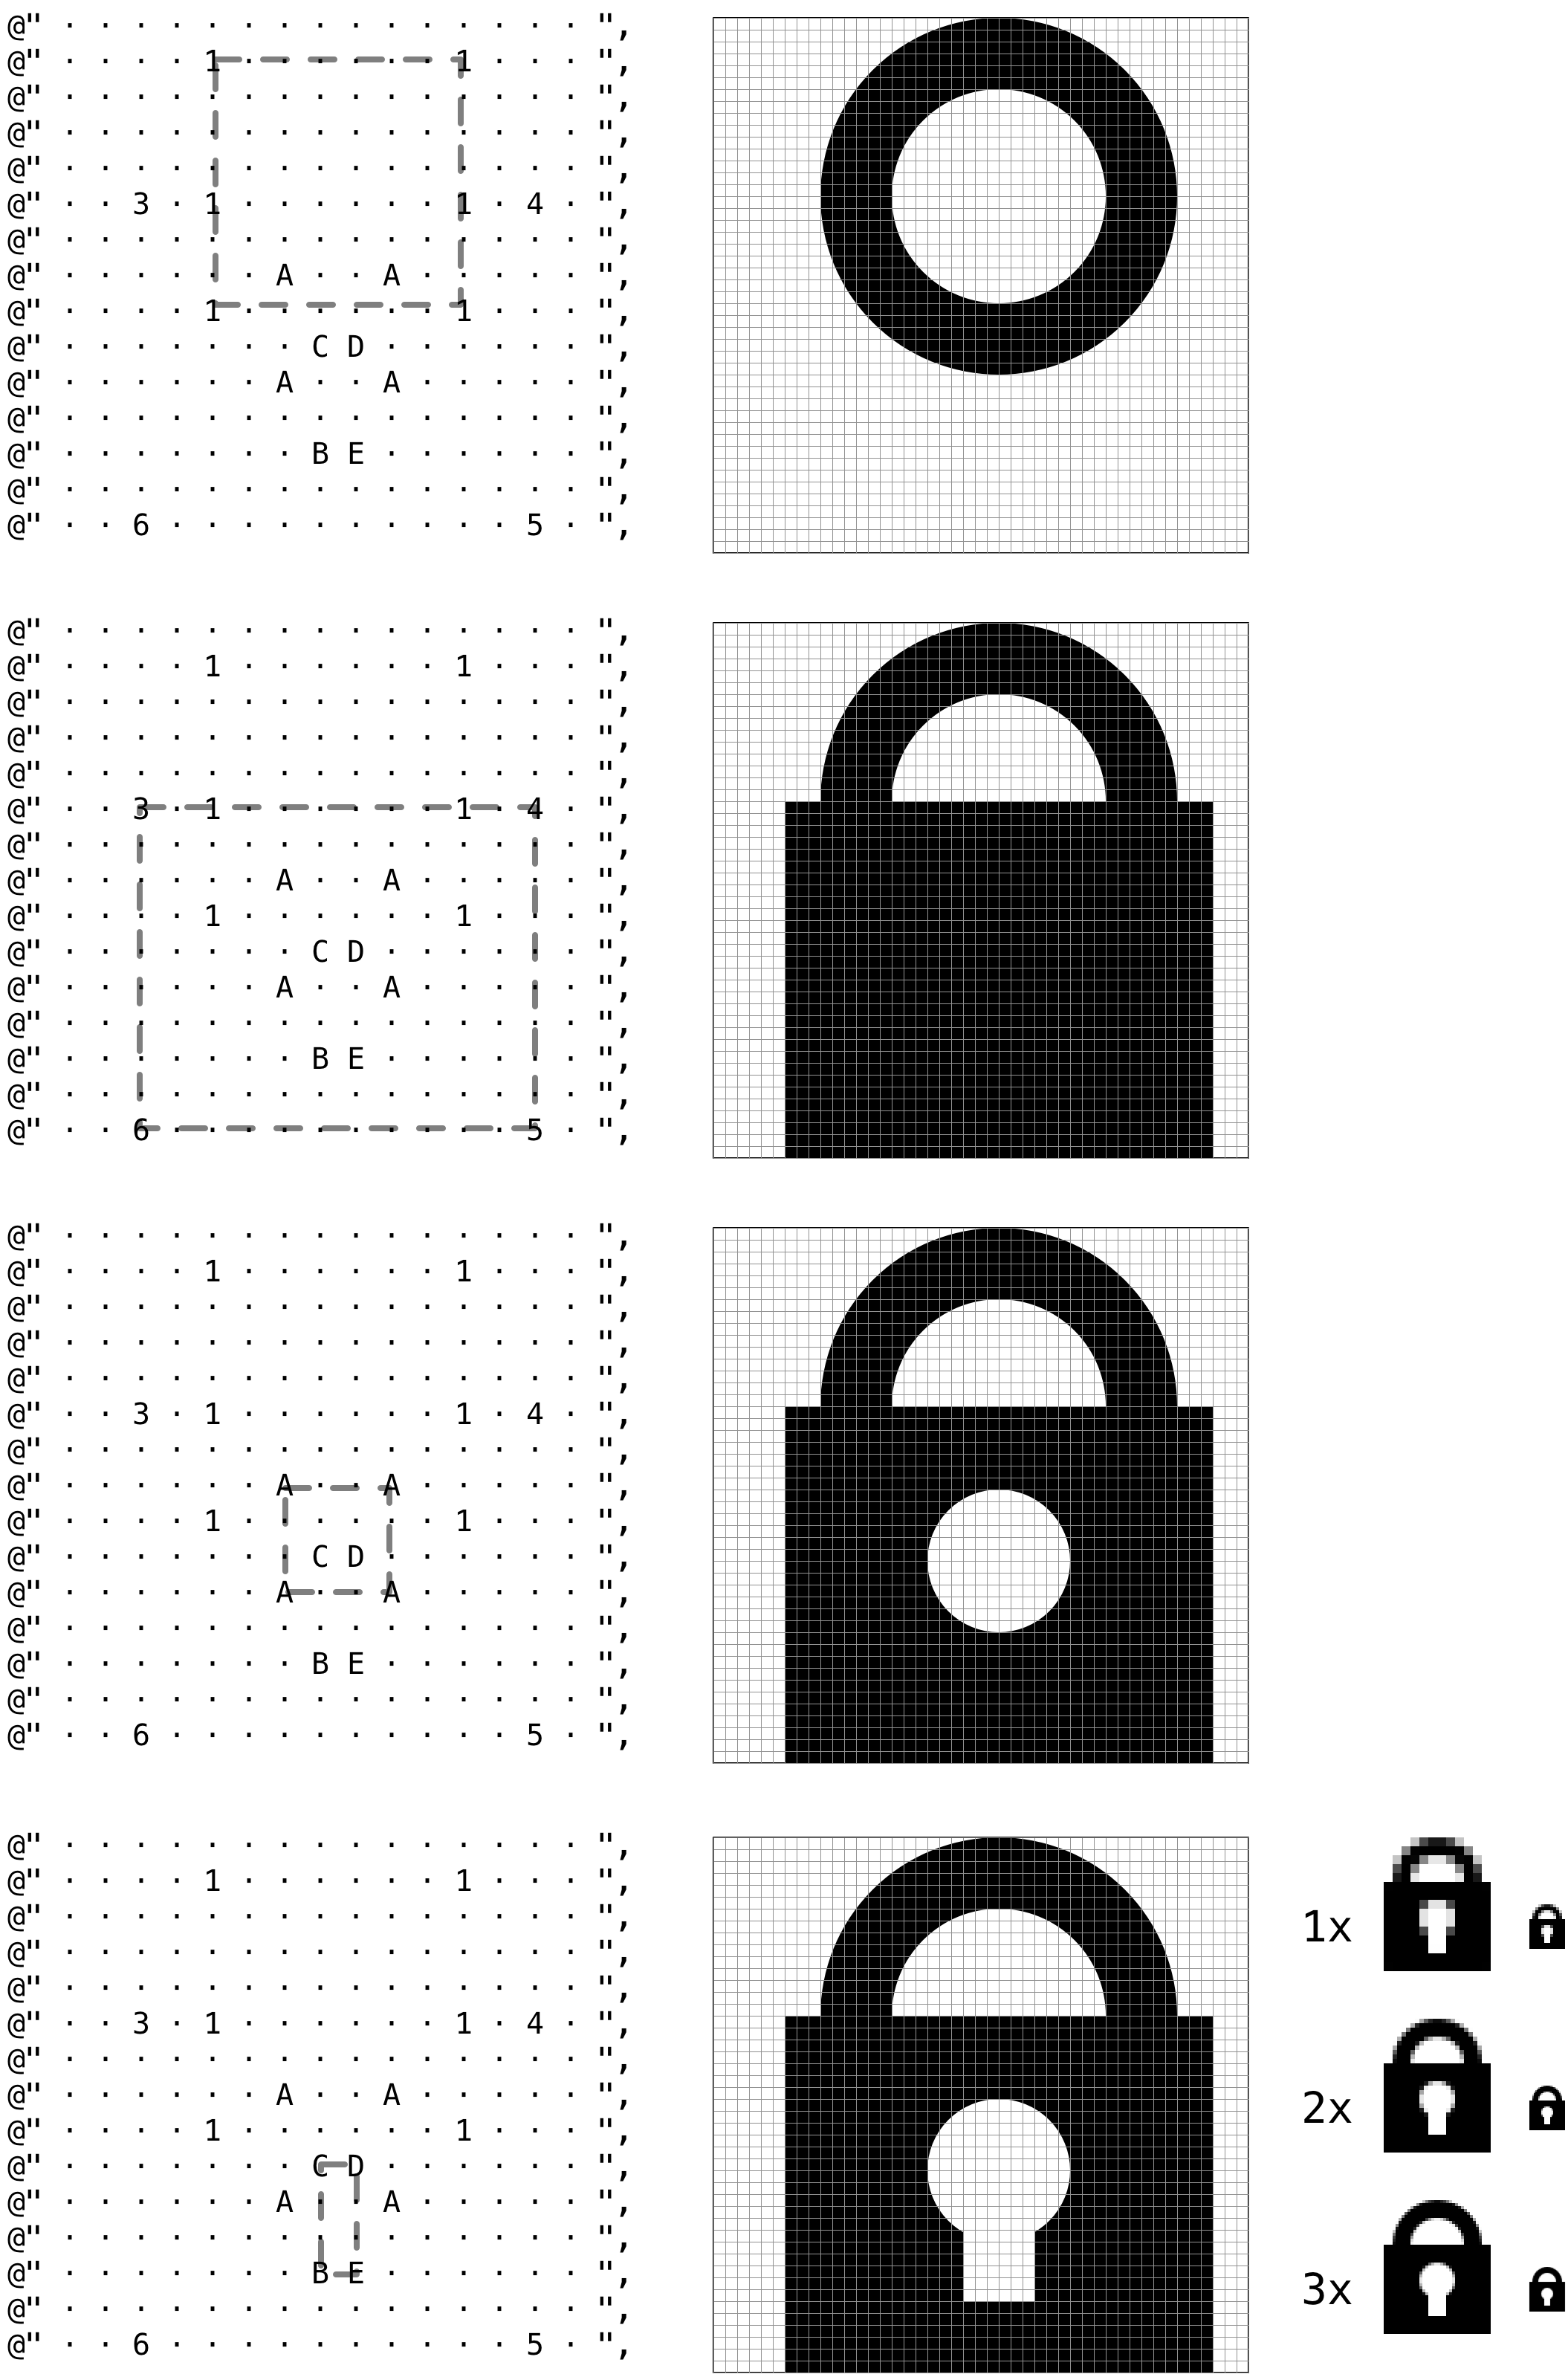 ASCIImage drawing a lock using multiple layered shapes of different colors